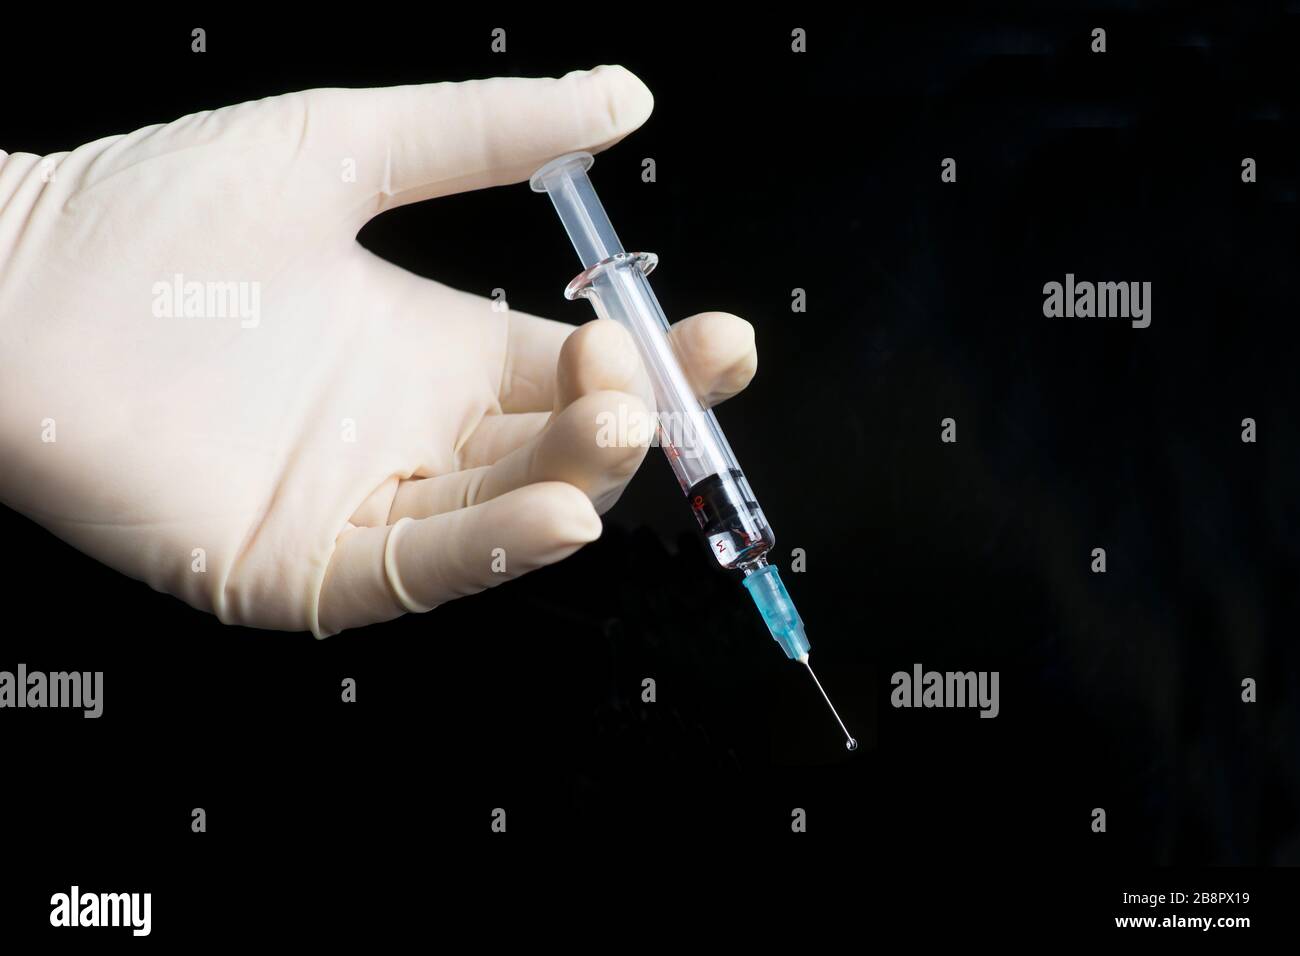 Gloved hand holds syringe with droplet on black background. Stock Photo